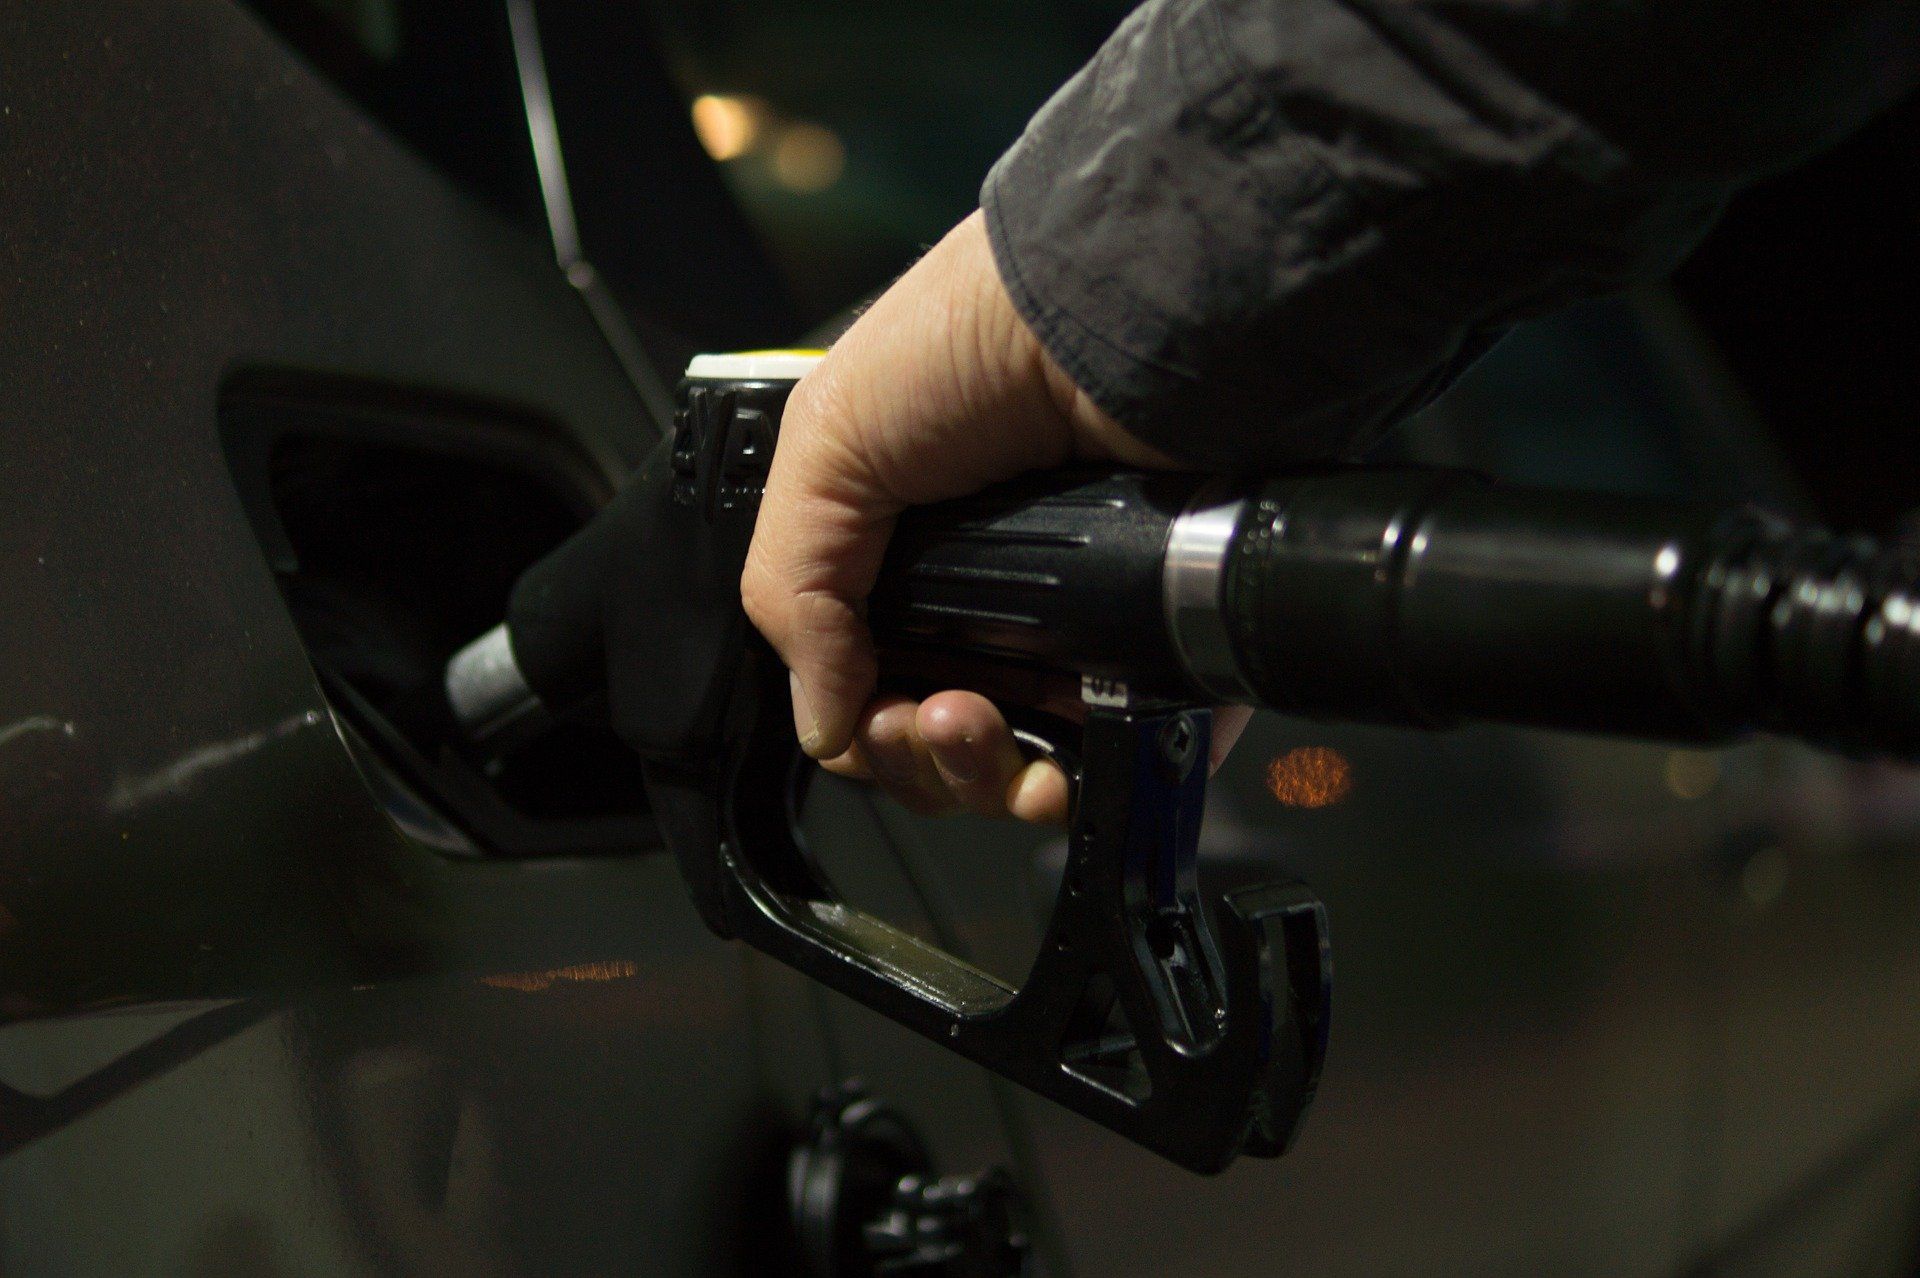 Fuel prices: Petrol priced at Rs 95.41, diesel Rs 86.67 in Delhi on March 1, 2022